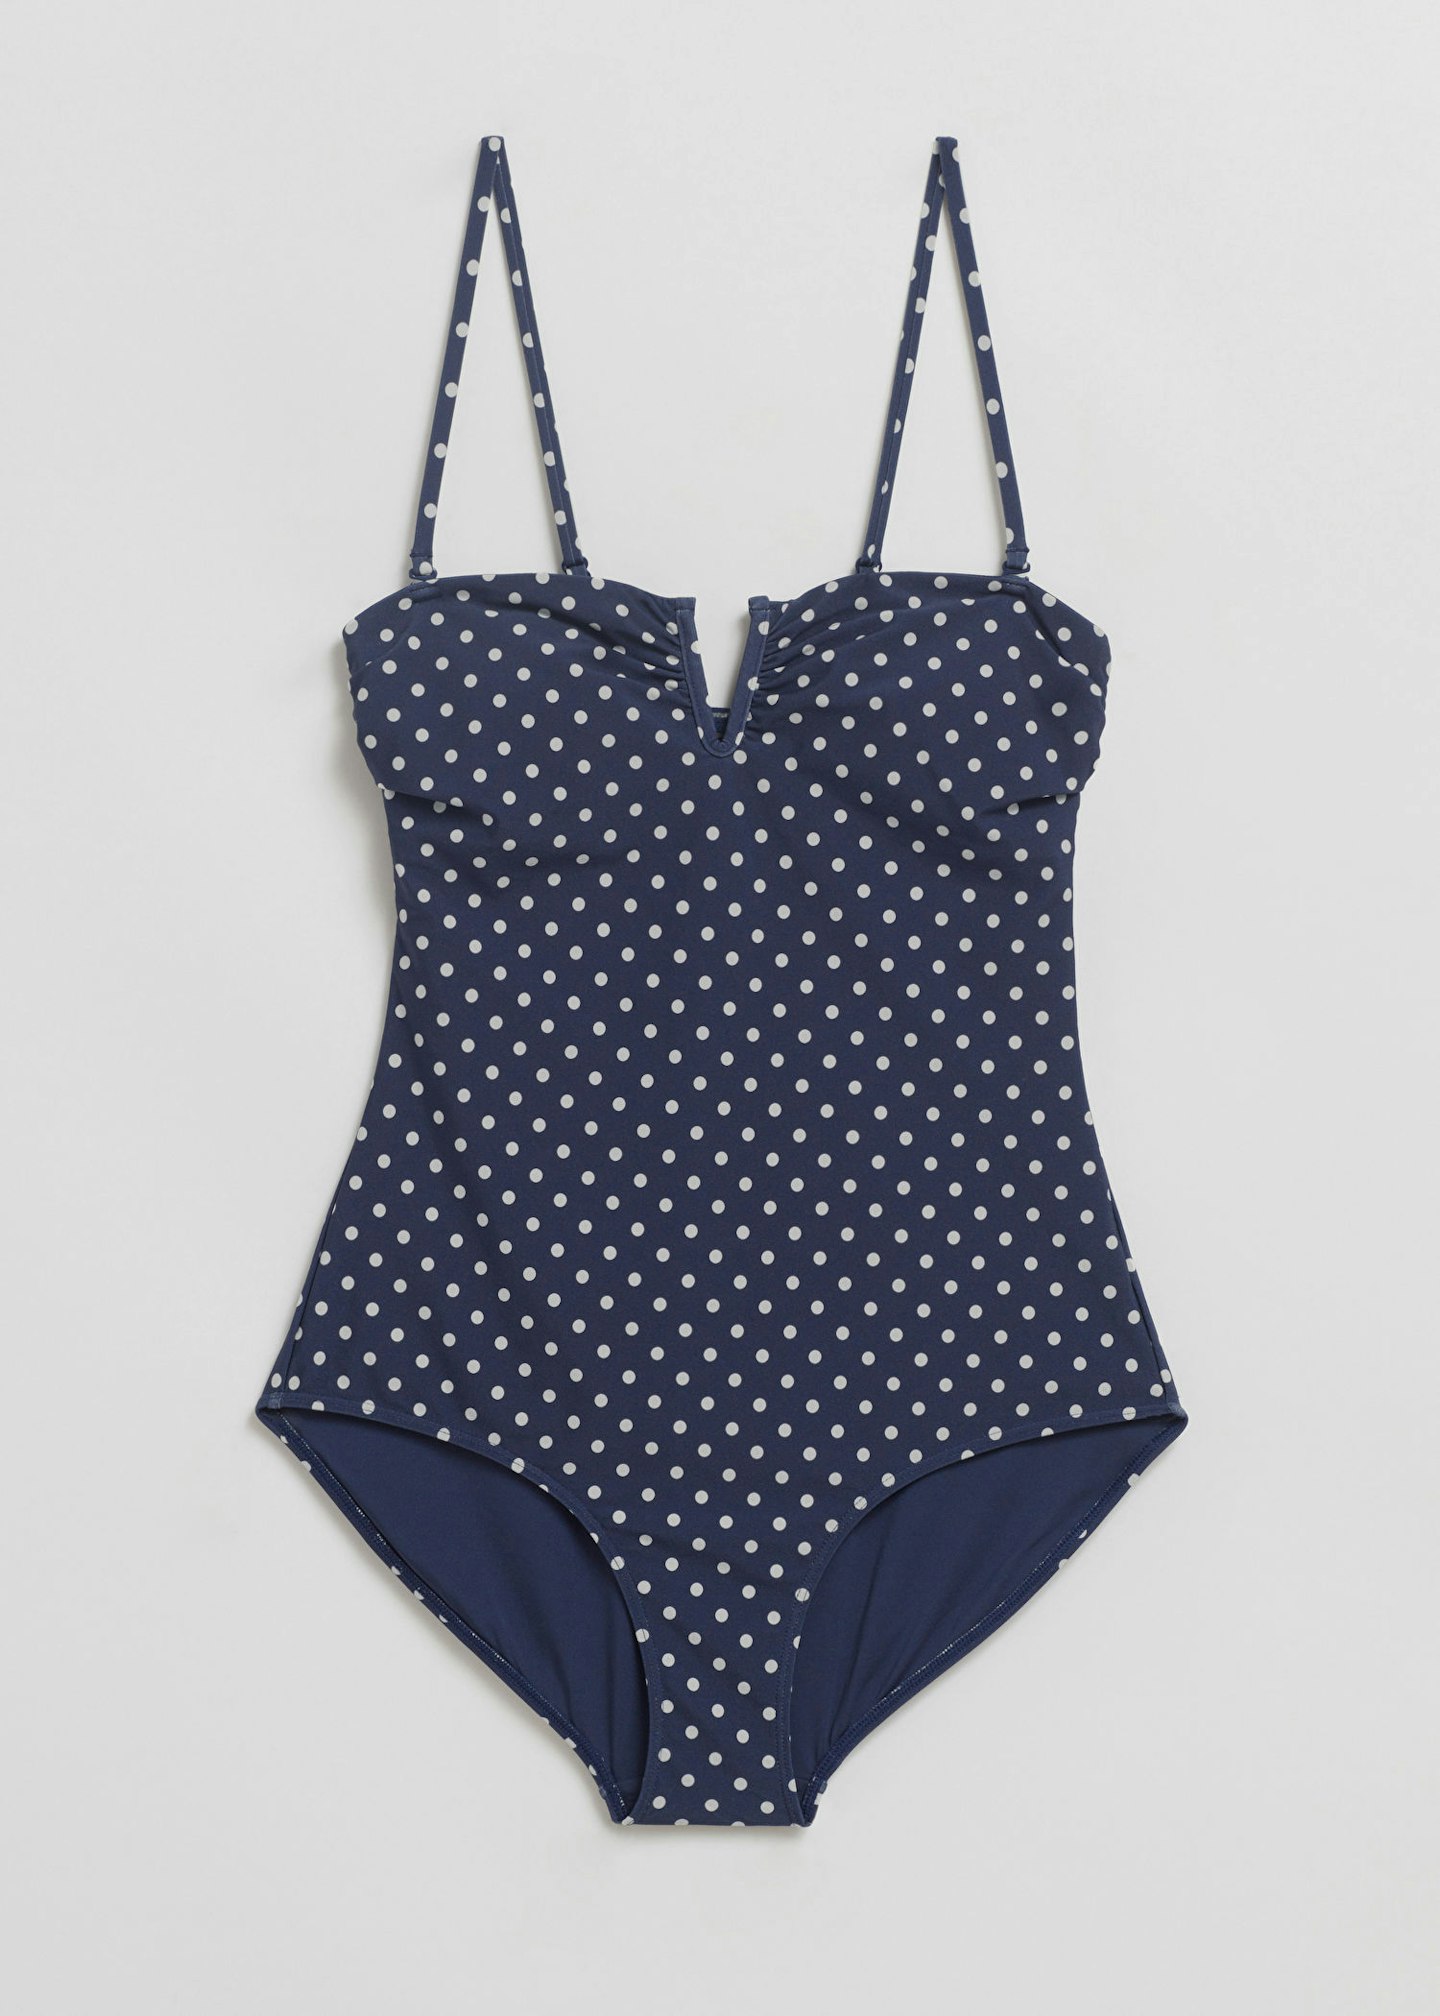 & Other Stories polka dot swimsuit